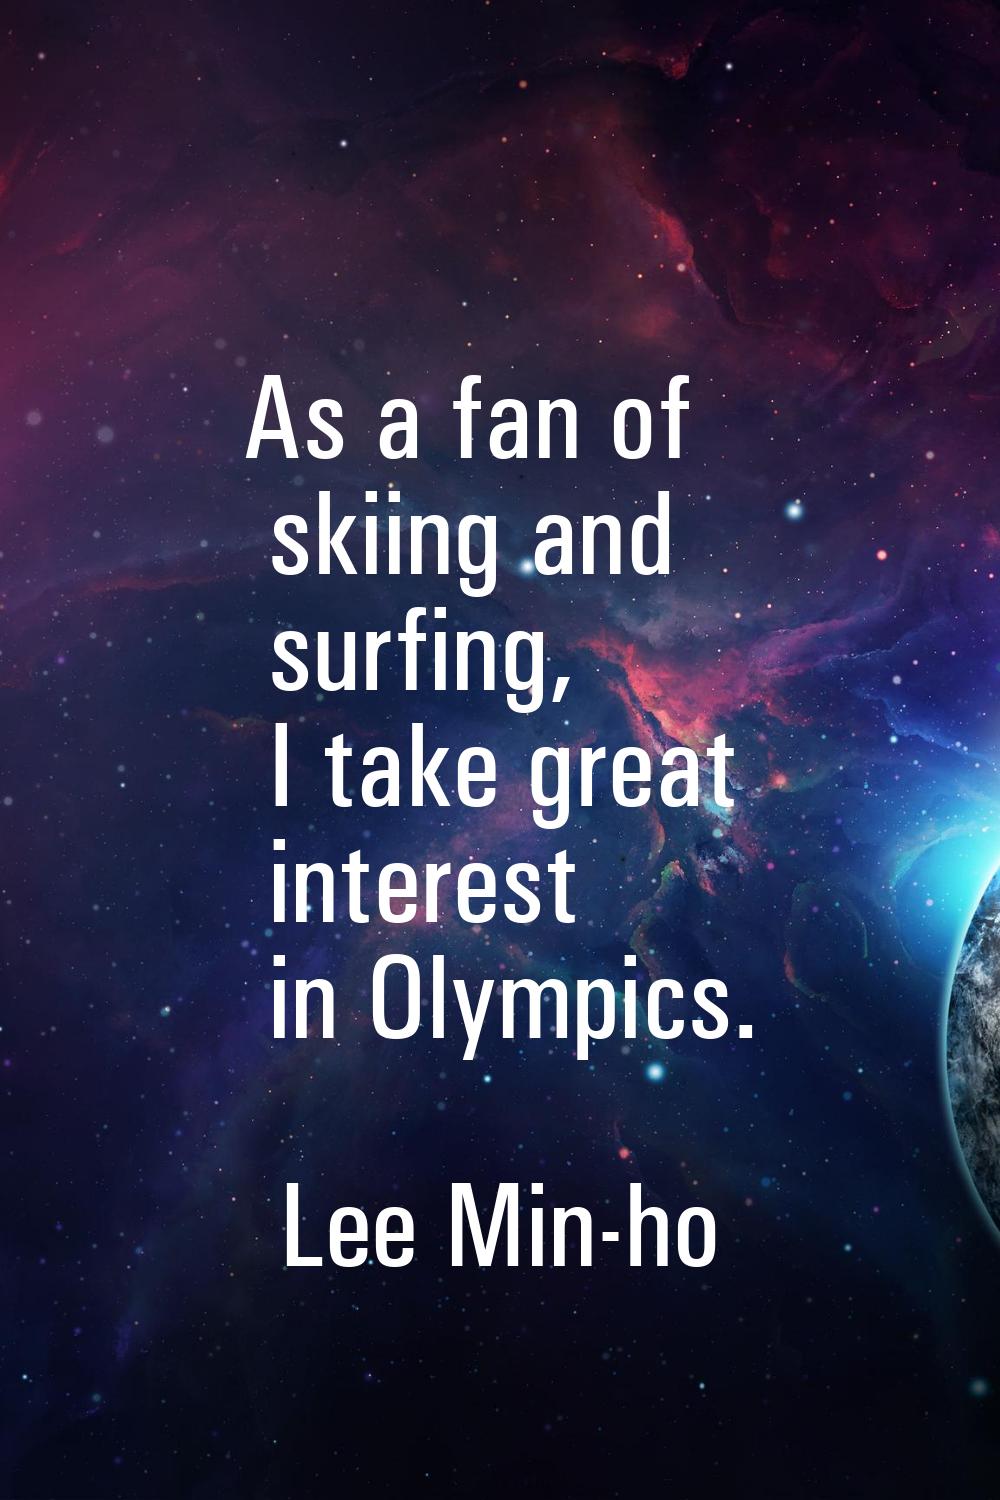 As a fan of skiing and surfing, I take great interest in Olympics.